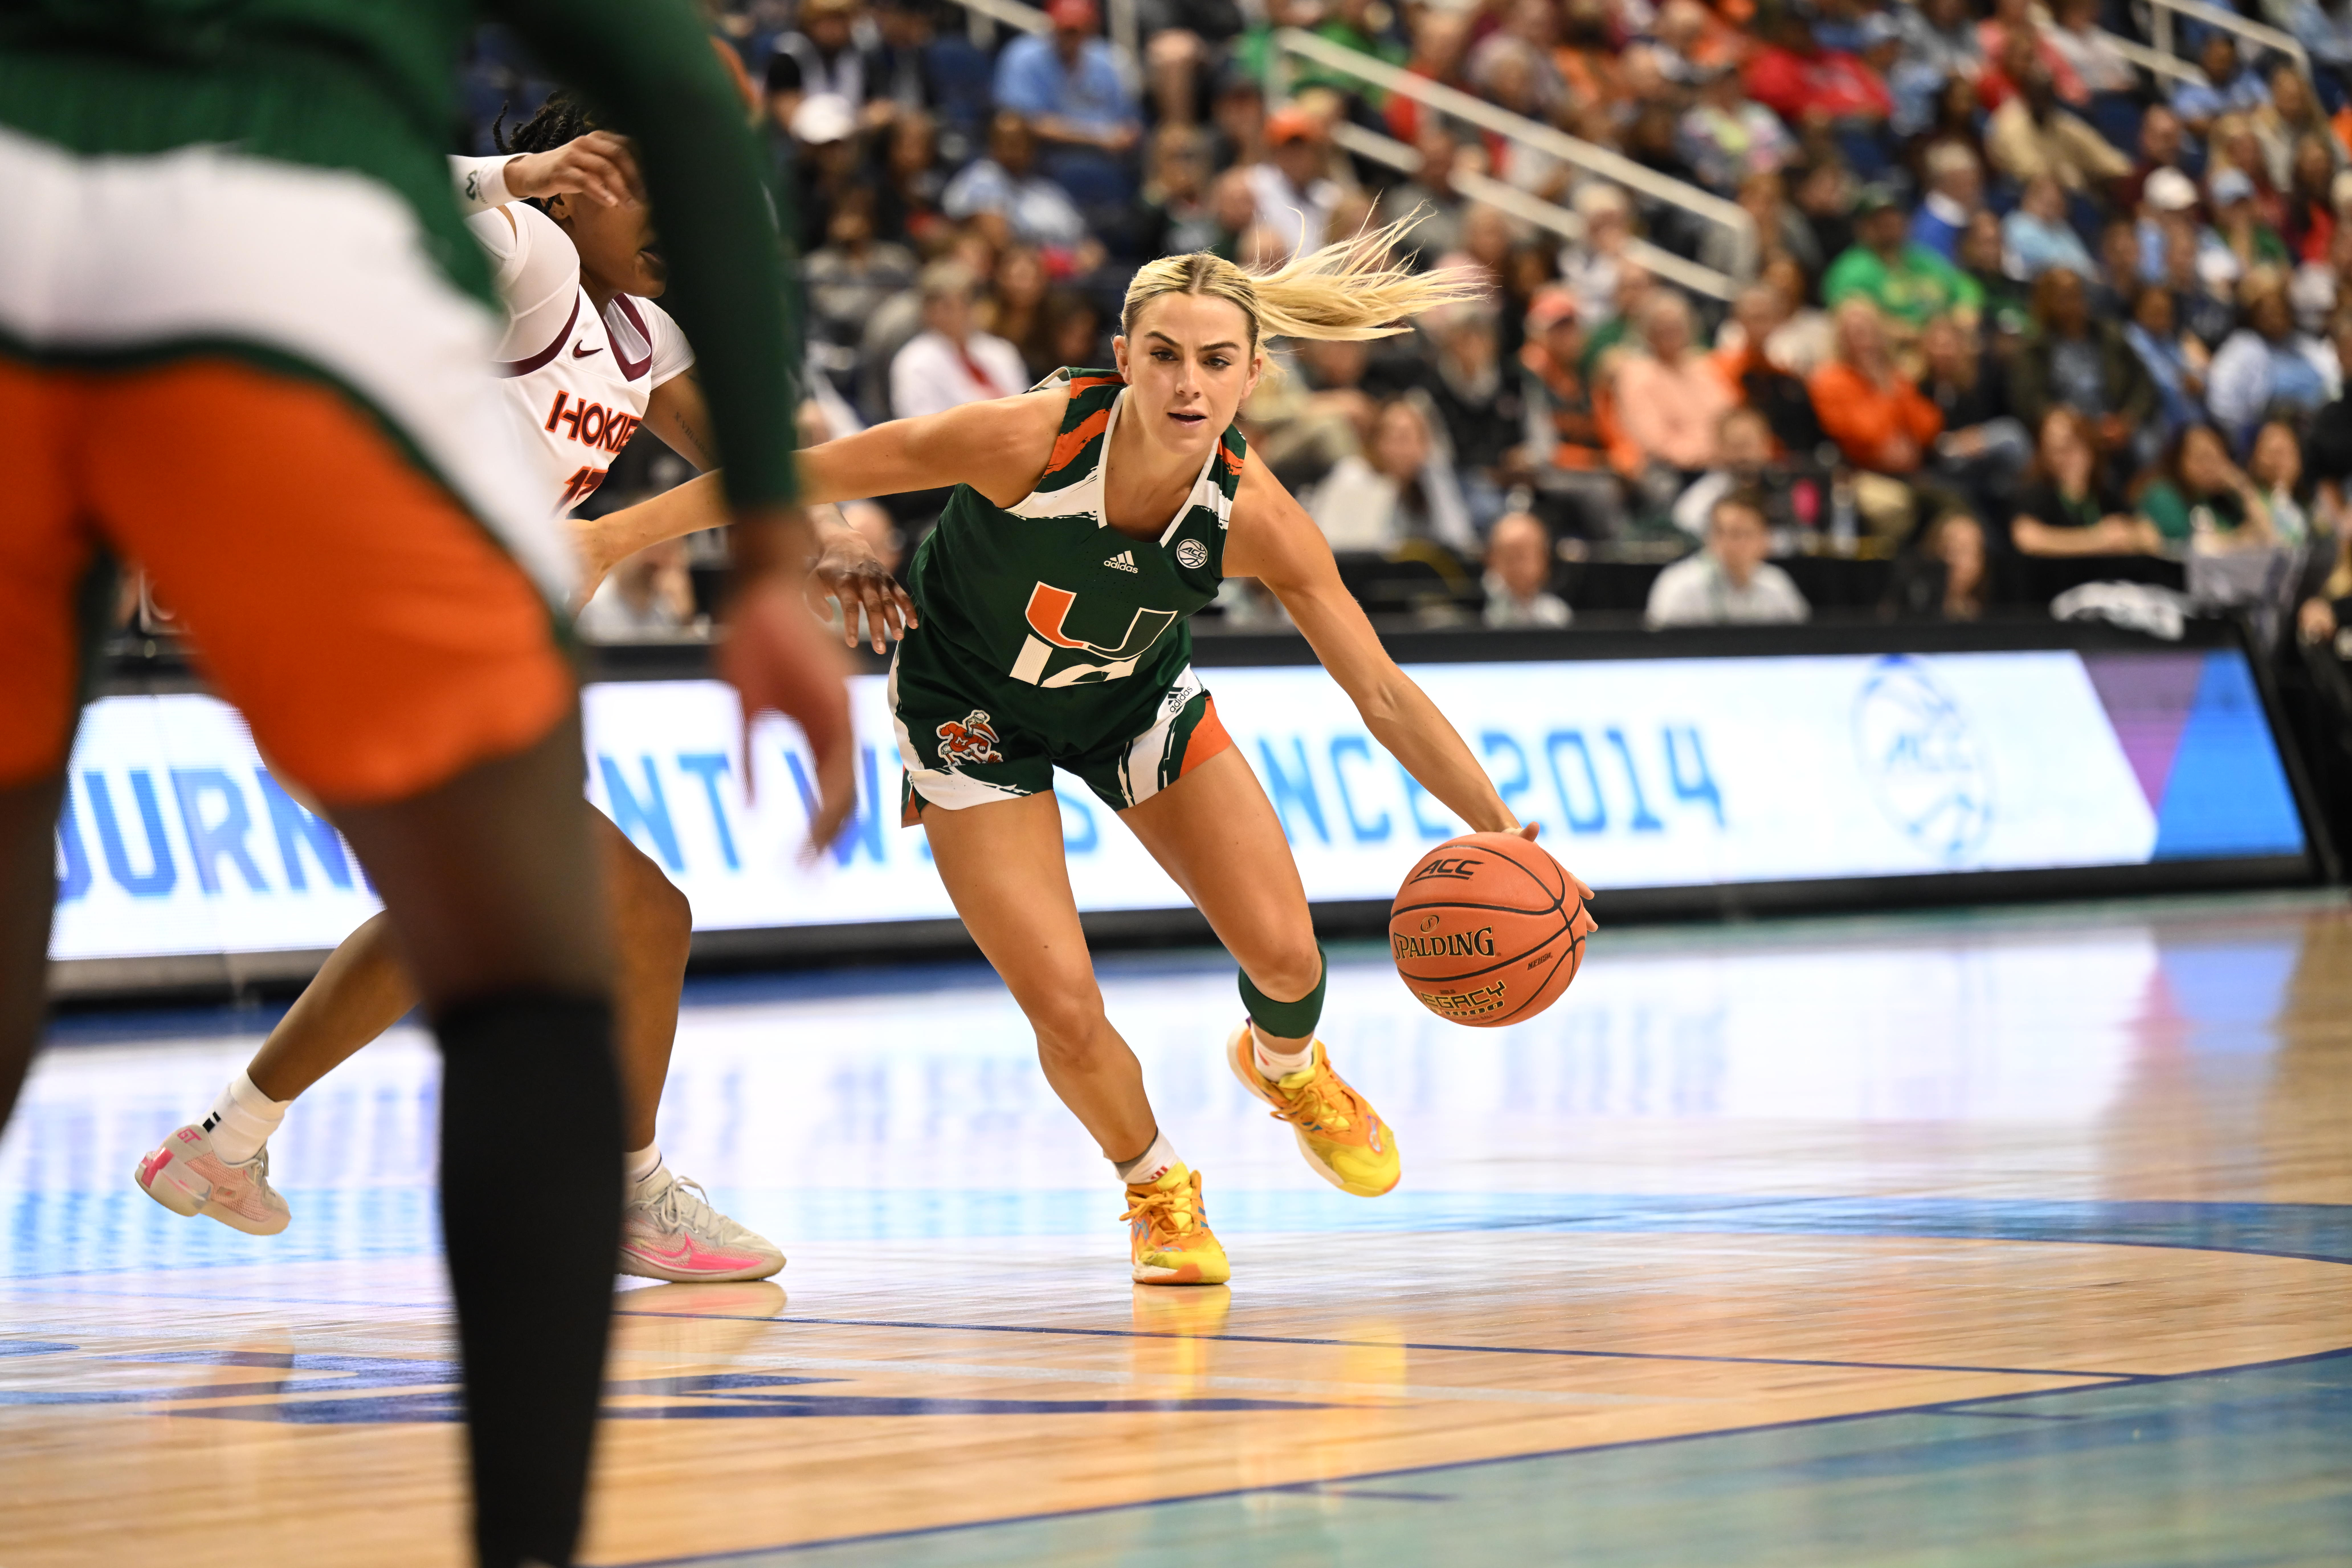 Hurricanes guard Haley Cavinder drives to the lane during the first half at Greensboro Coliseum.